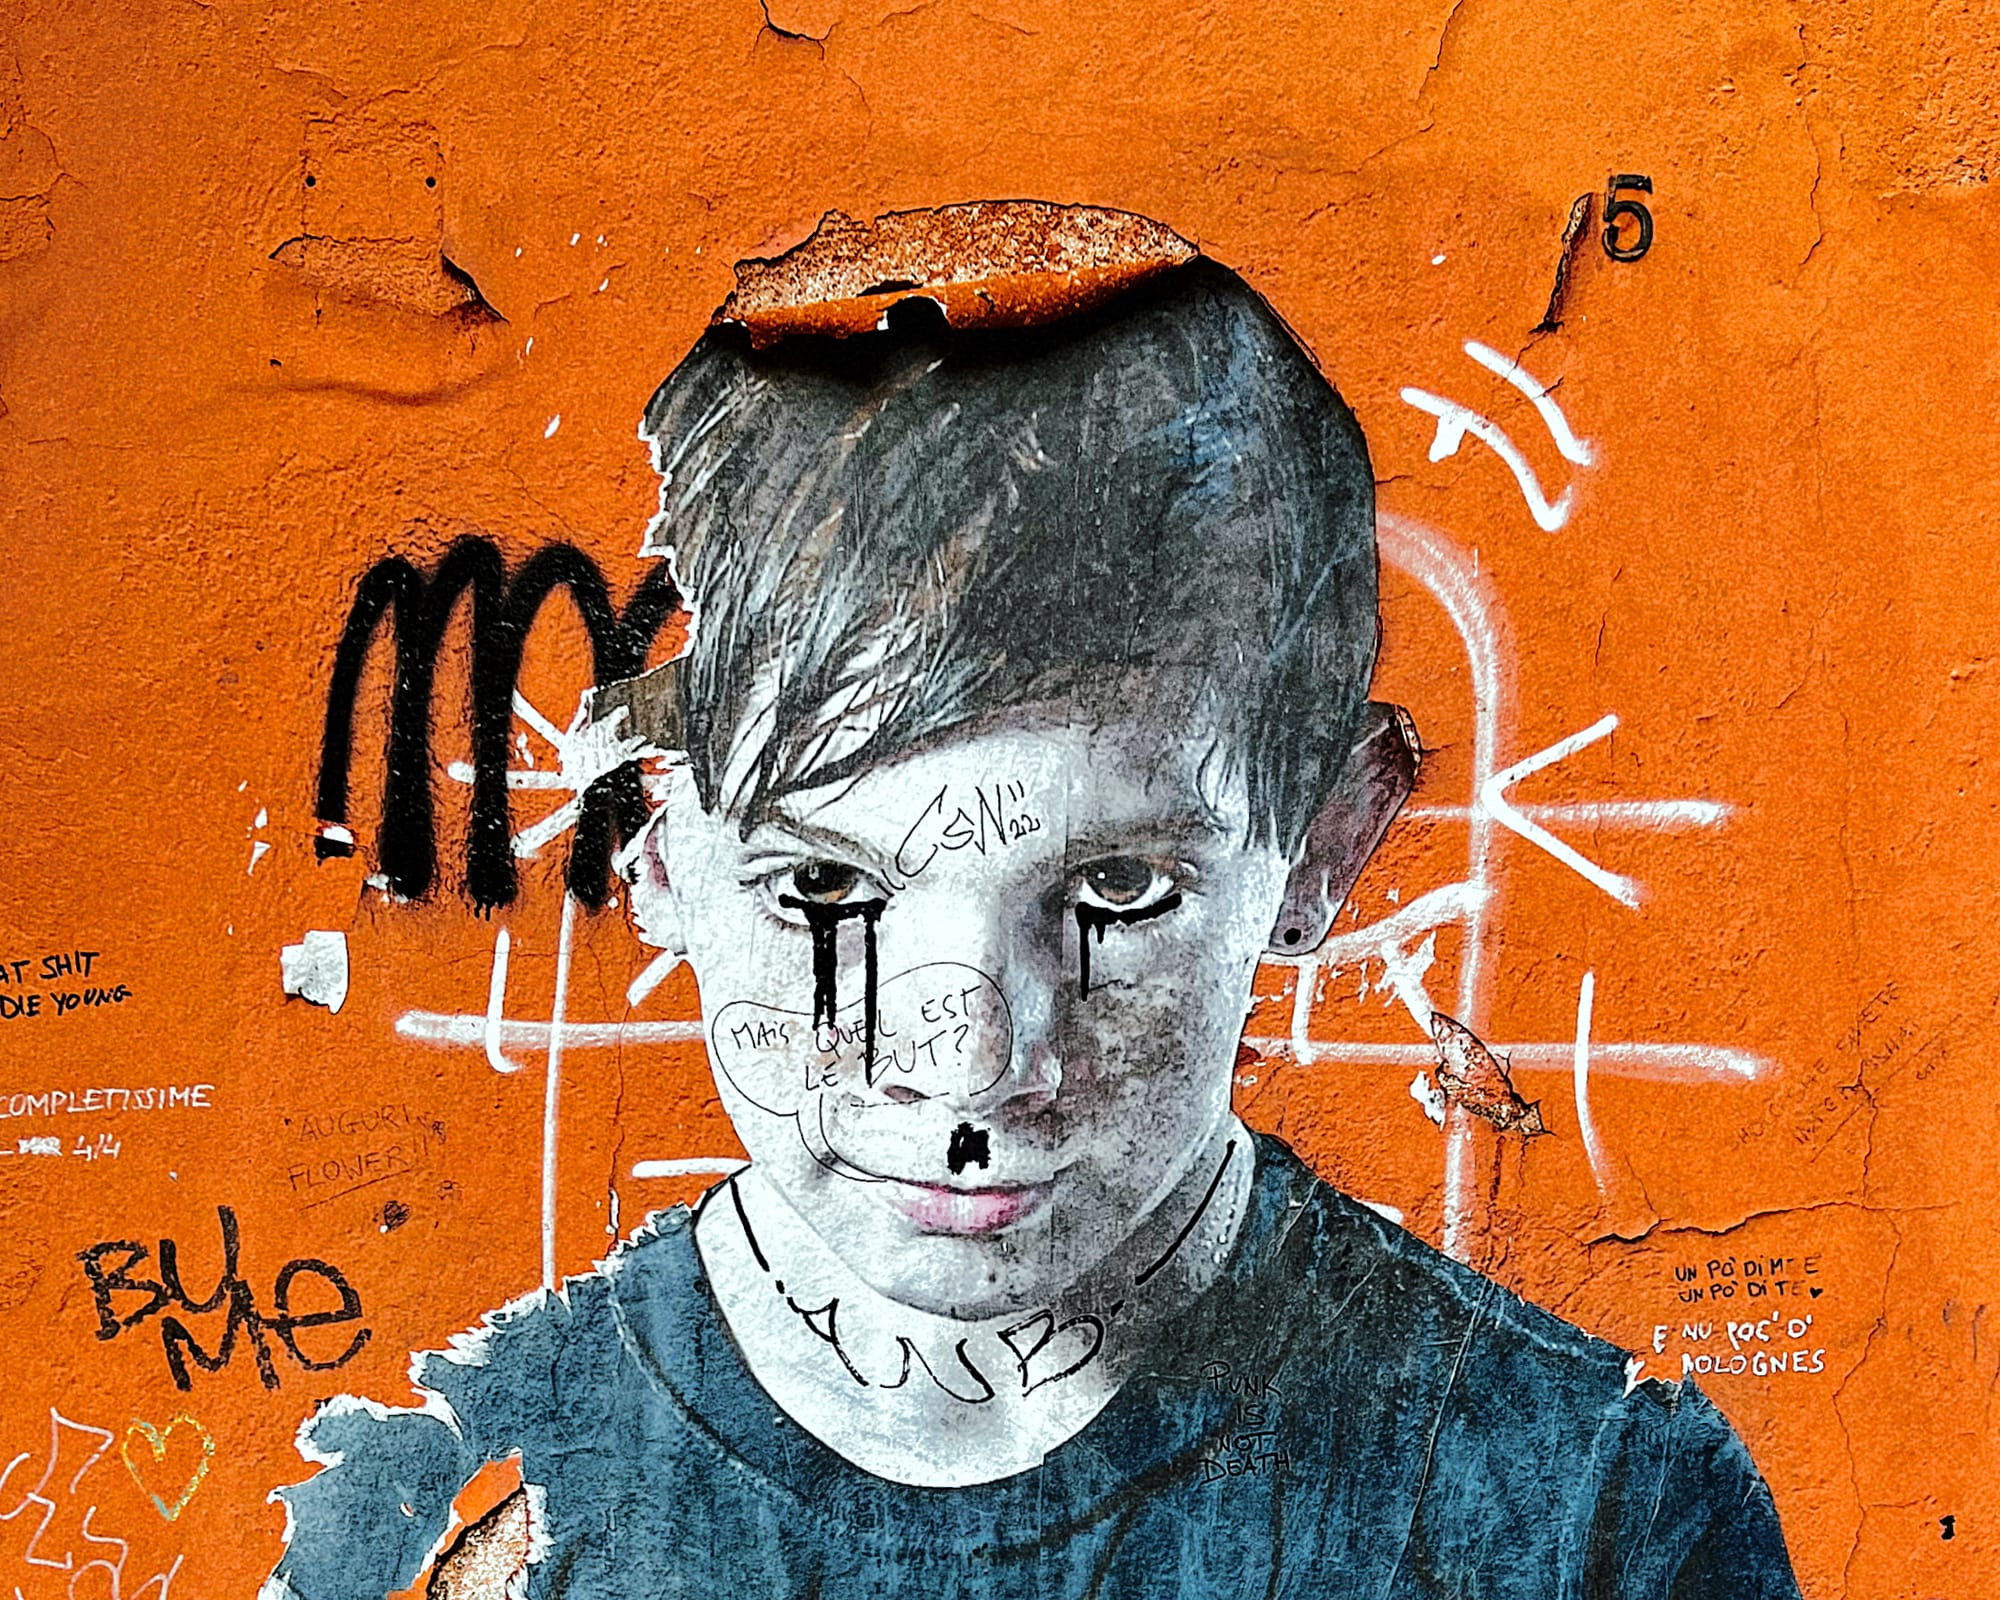 Street art in Bologna of a boy's face against an orange background